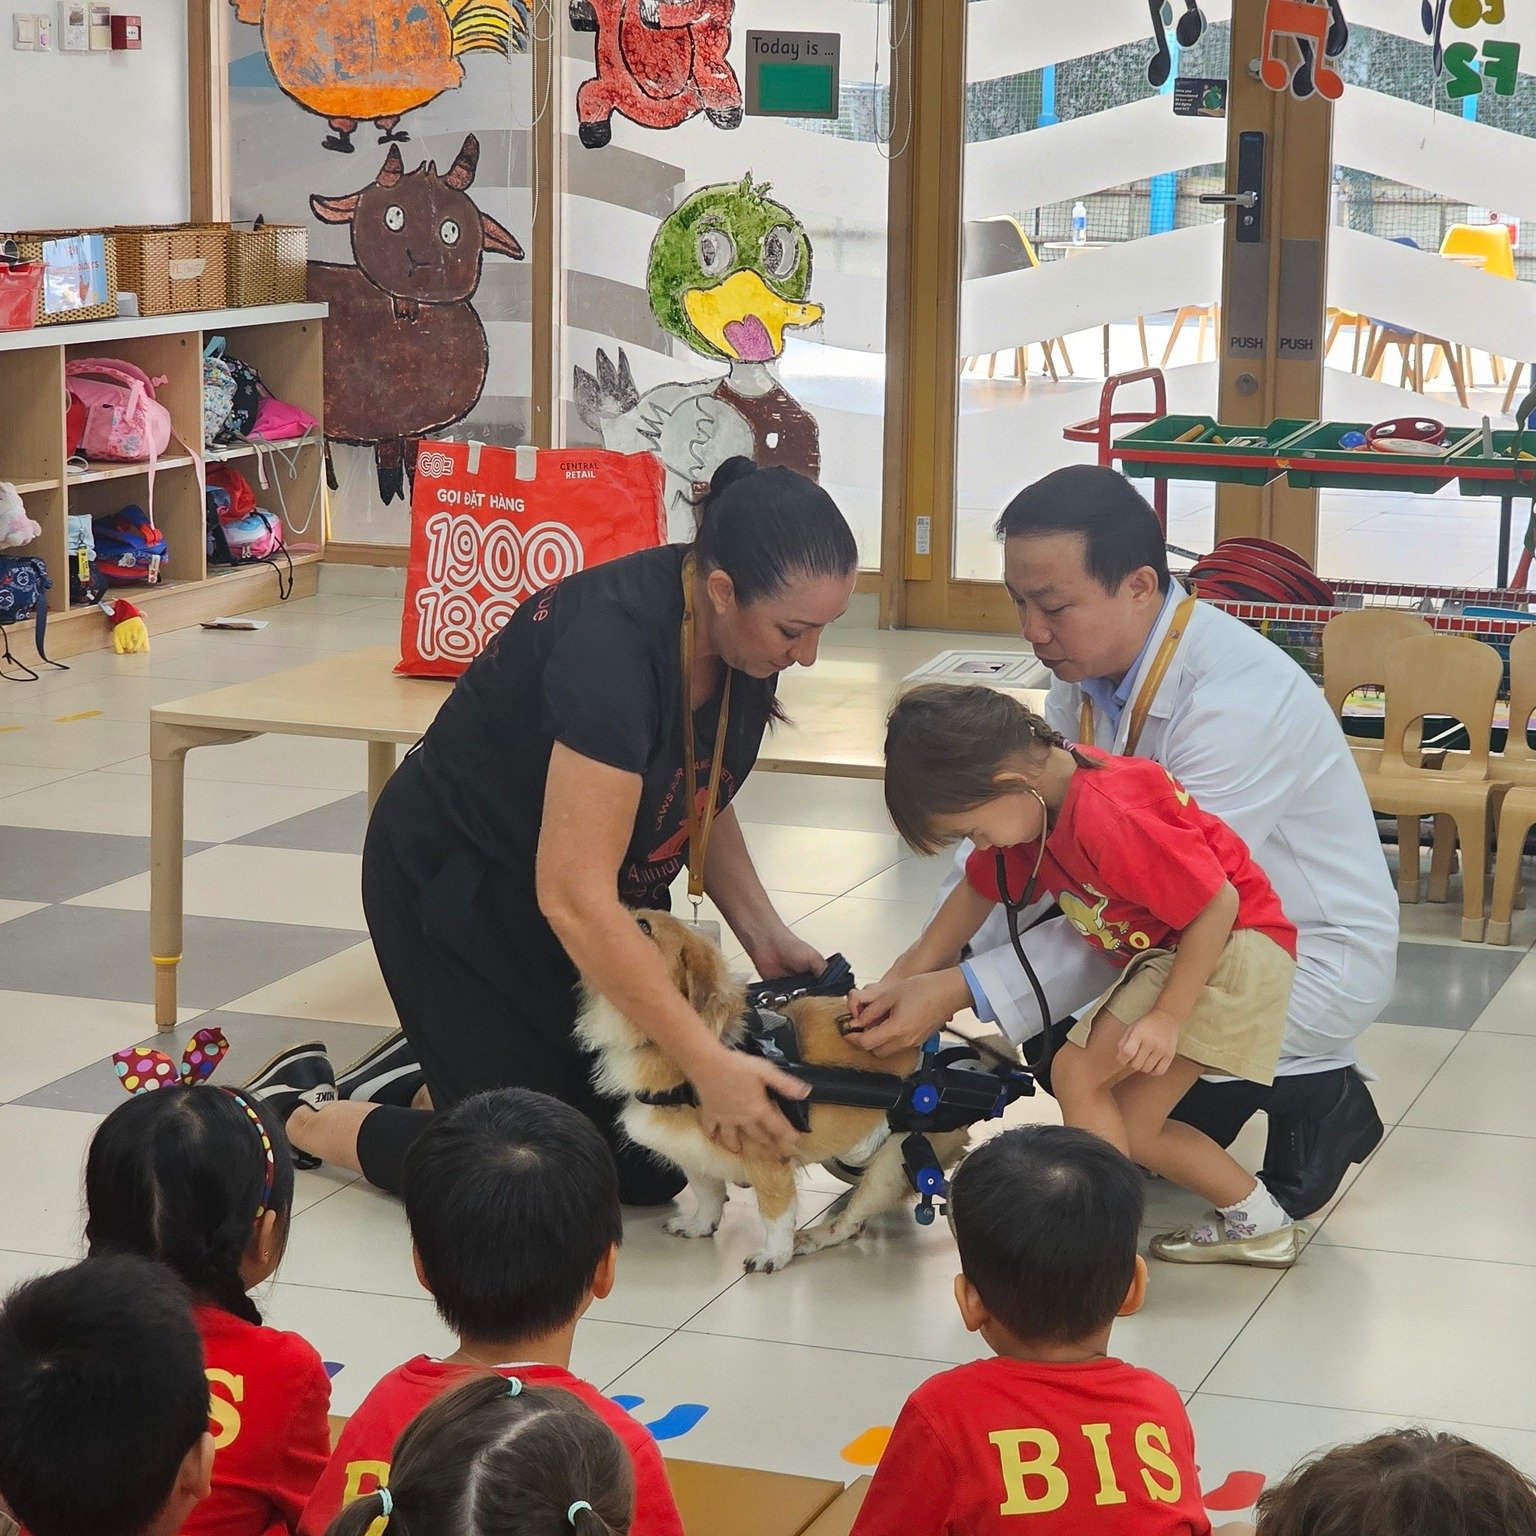 We extend our thanks to @bishcmc for inviting us to spend time with your early year learners, sharing about animal care. Special thanks to Dr. Nghia for joining us and sharing his expertise with these young minds. We appreciate the generous donations